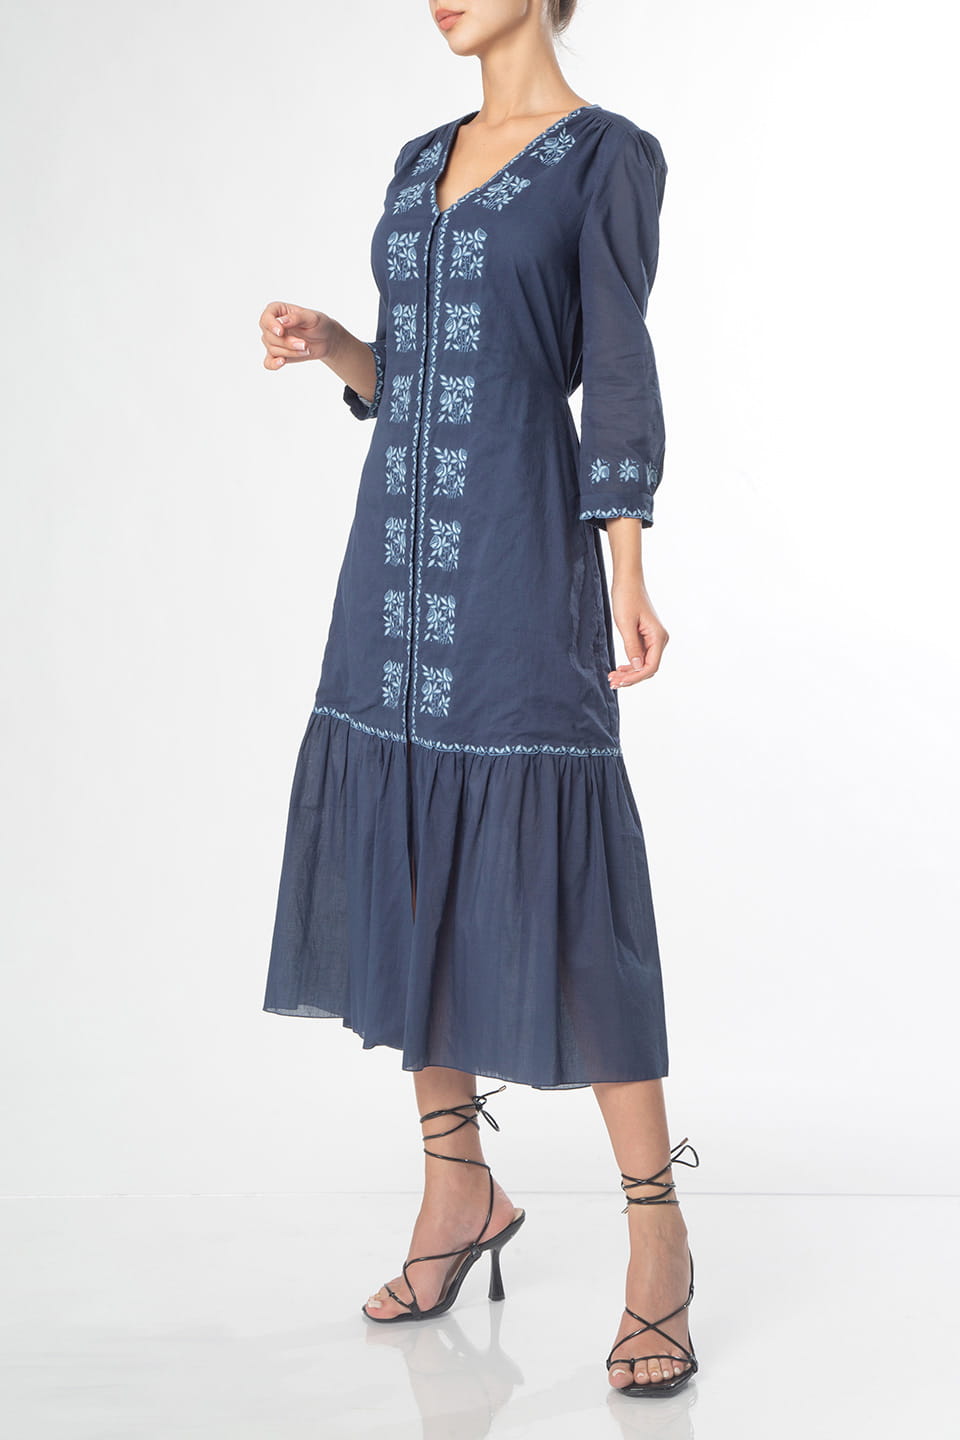 Designer Blue Midi dresses, shop online with free delivery in UAE. Product gallery 3